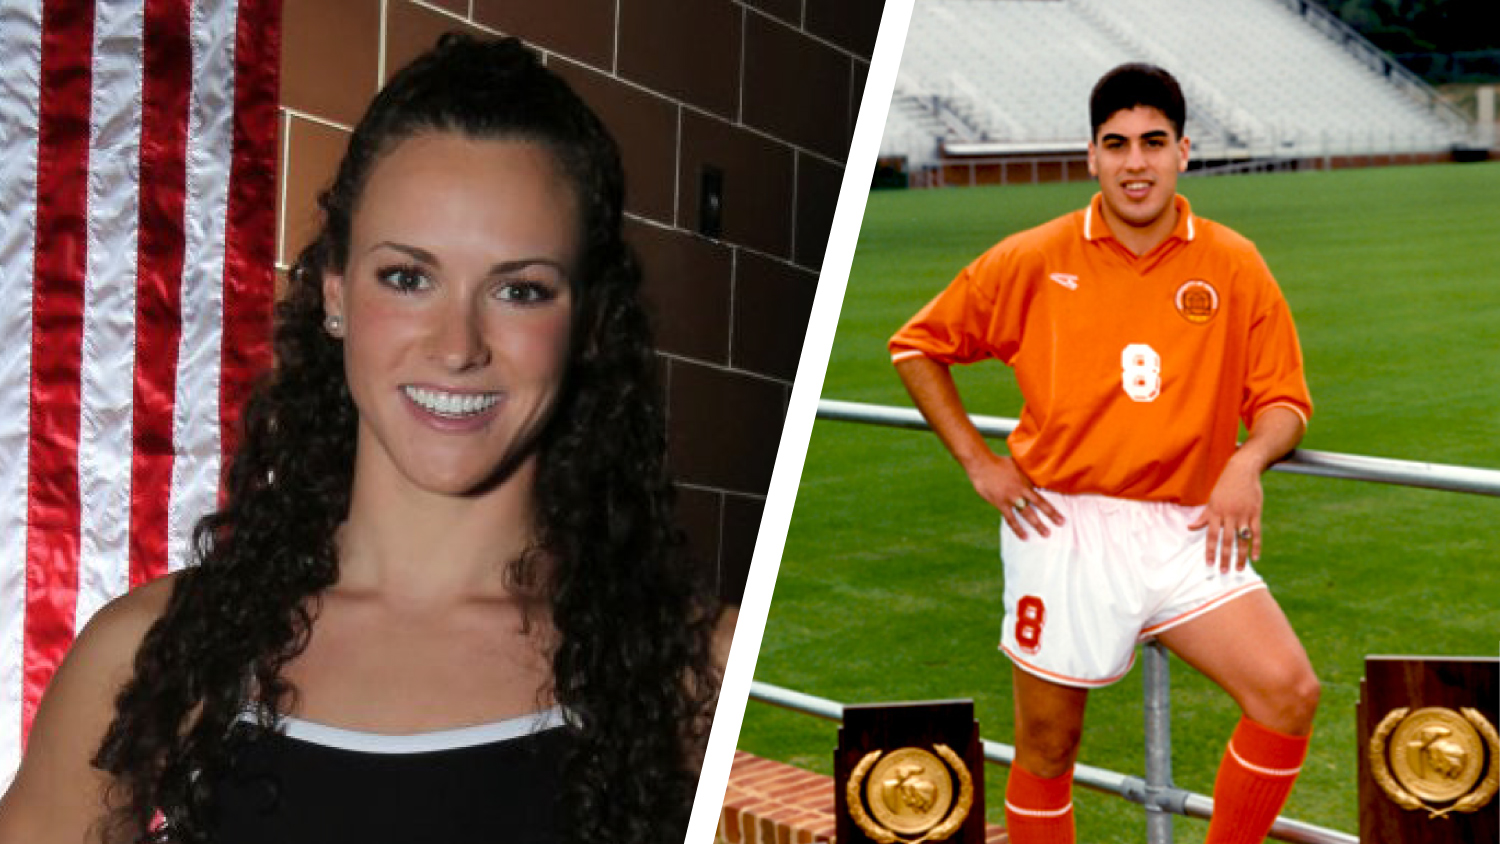 Headshots left to right: Lauren Perdue and Claudio Reyna standing in soccer uniform with NCAA trophies